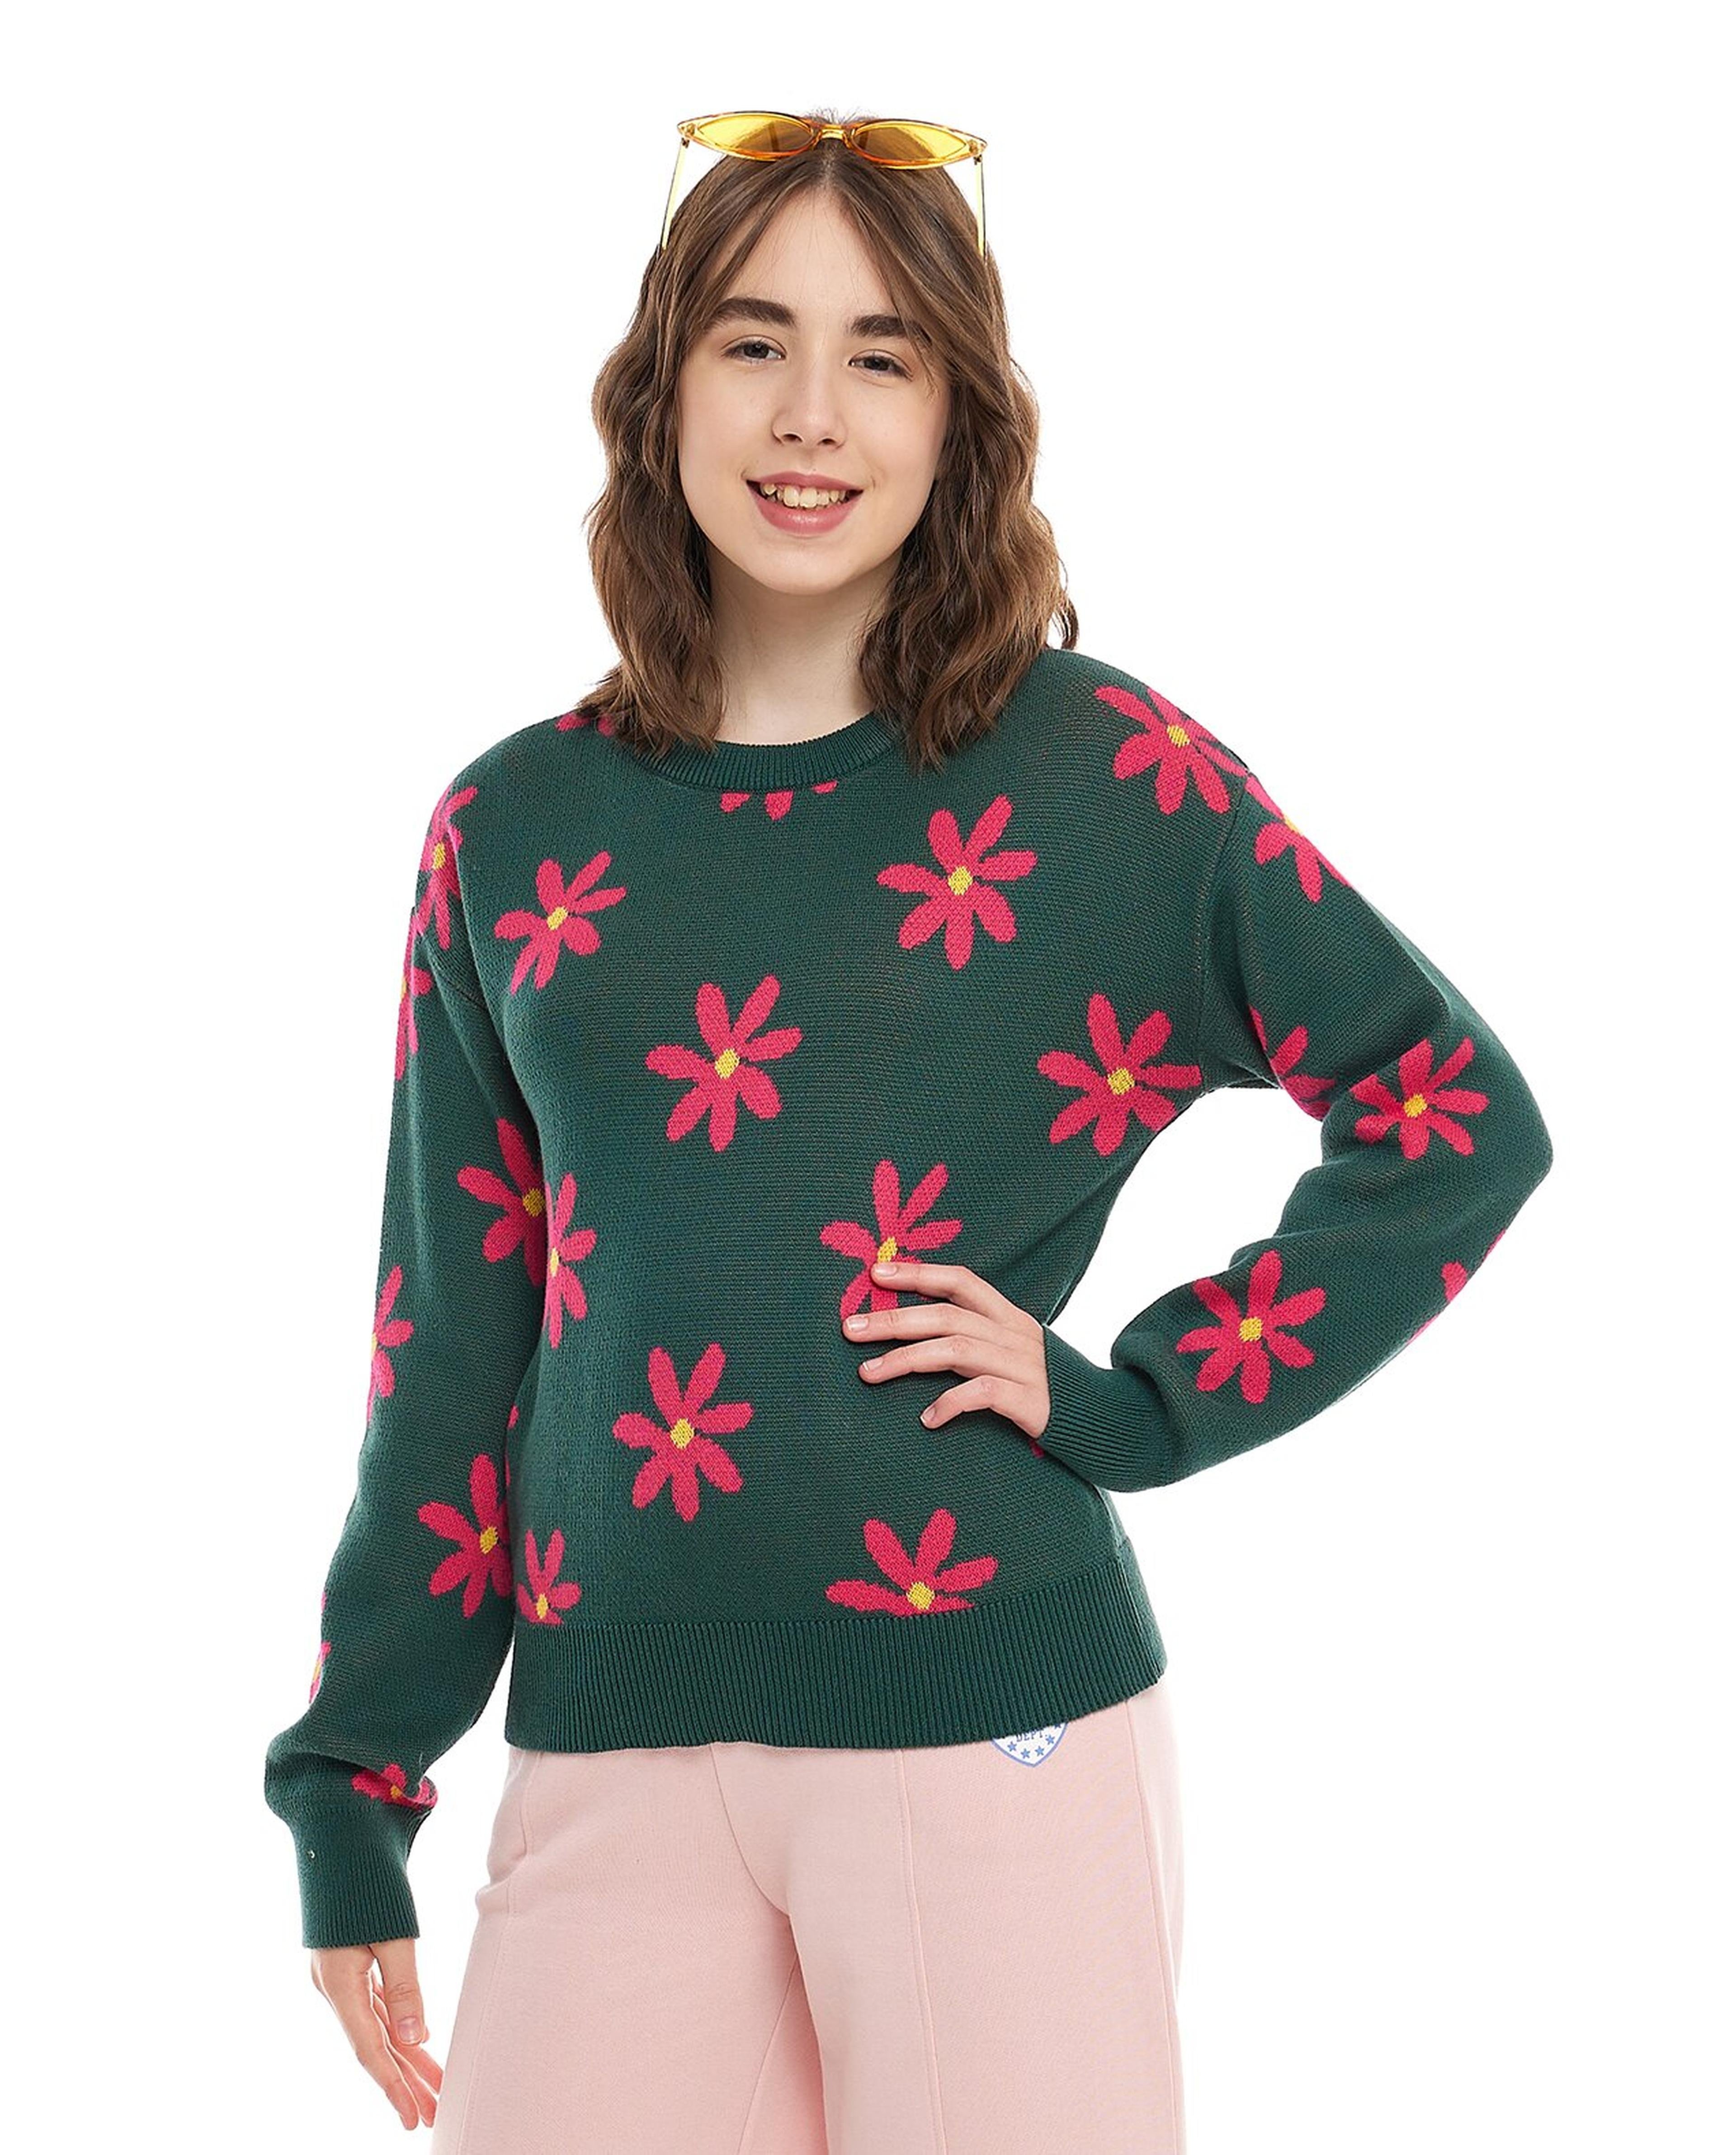 Floral Patterned Sweater with Crew Neck and Long Sleeves